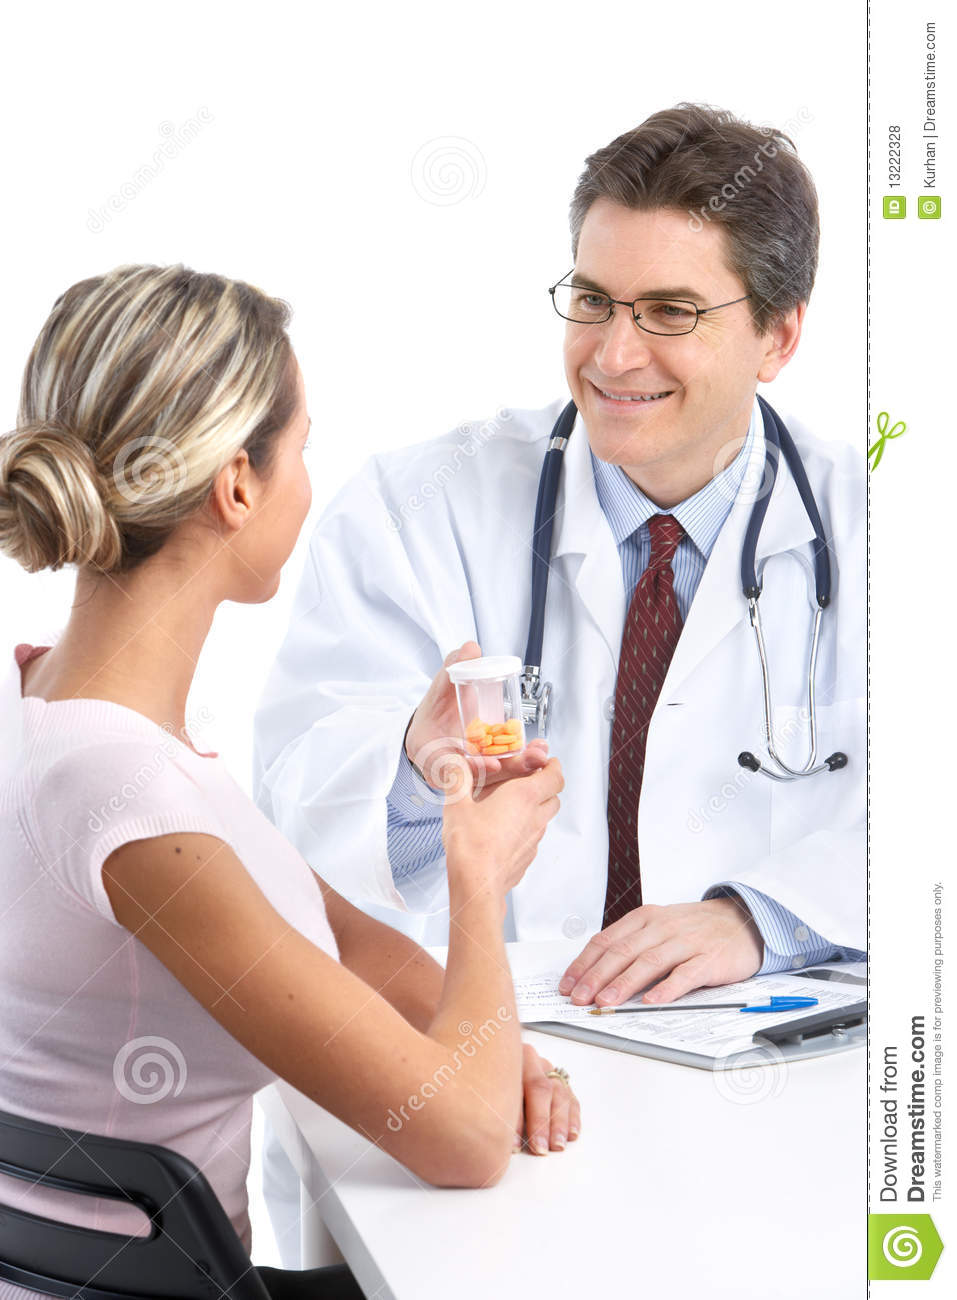 Woman Doctor and Patient